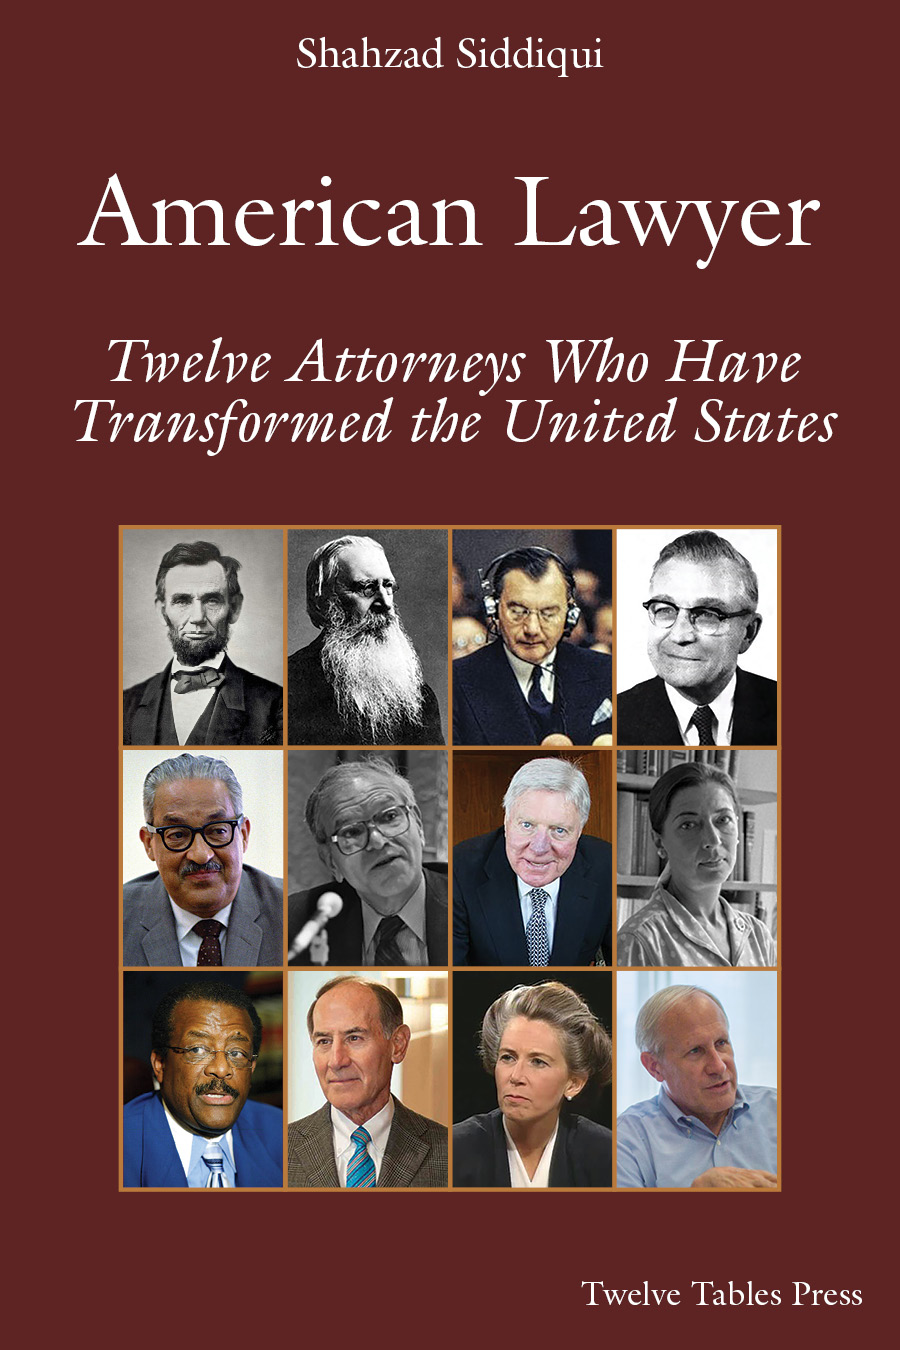 American Lawyer, Twelve Attorneys Who Have Transformed the United States thumbnail